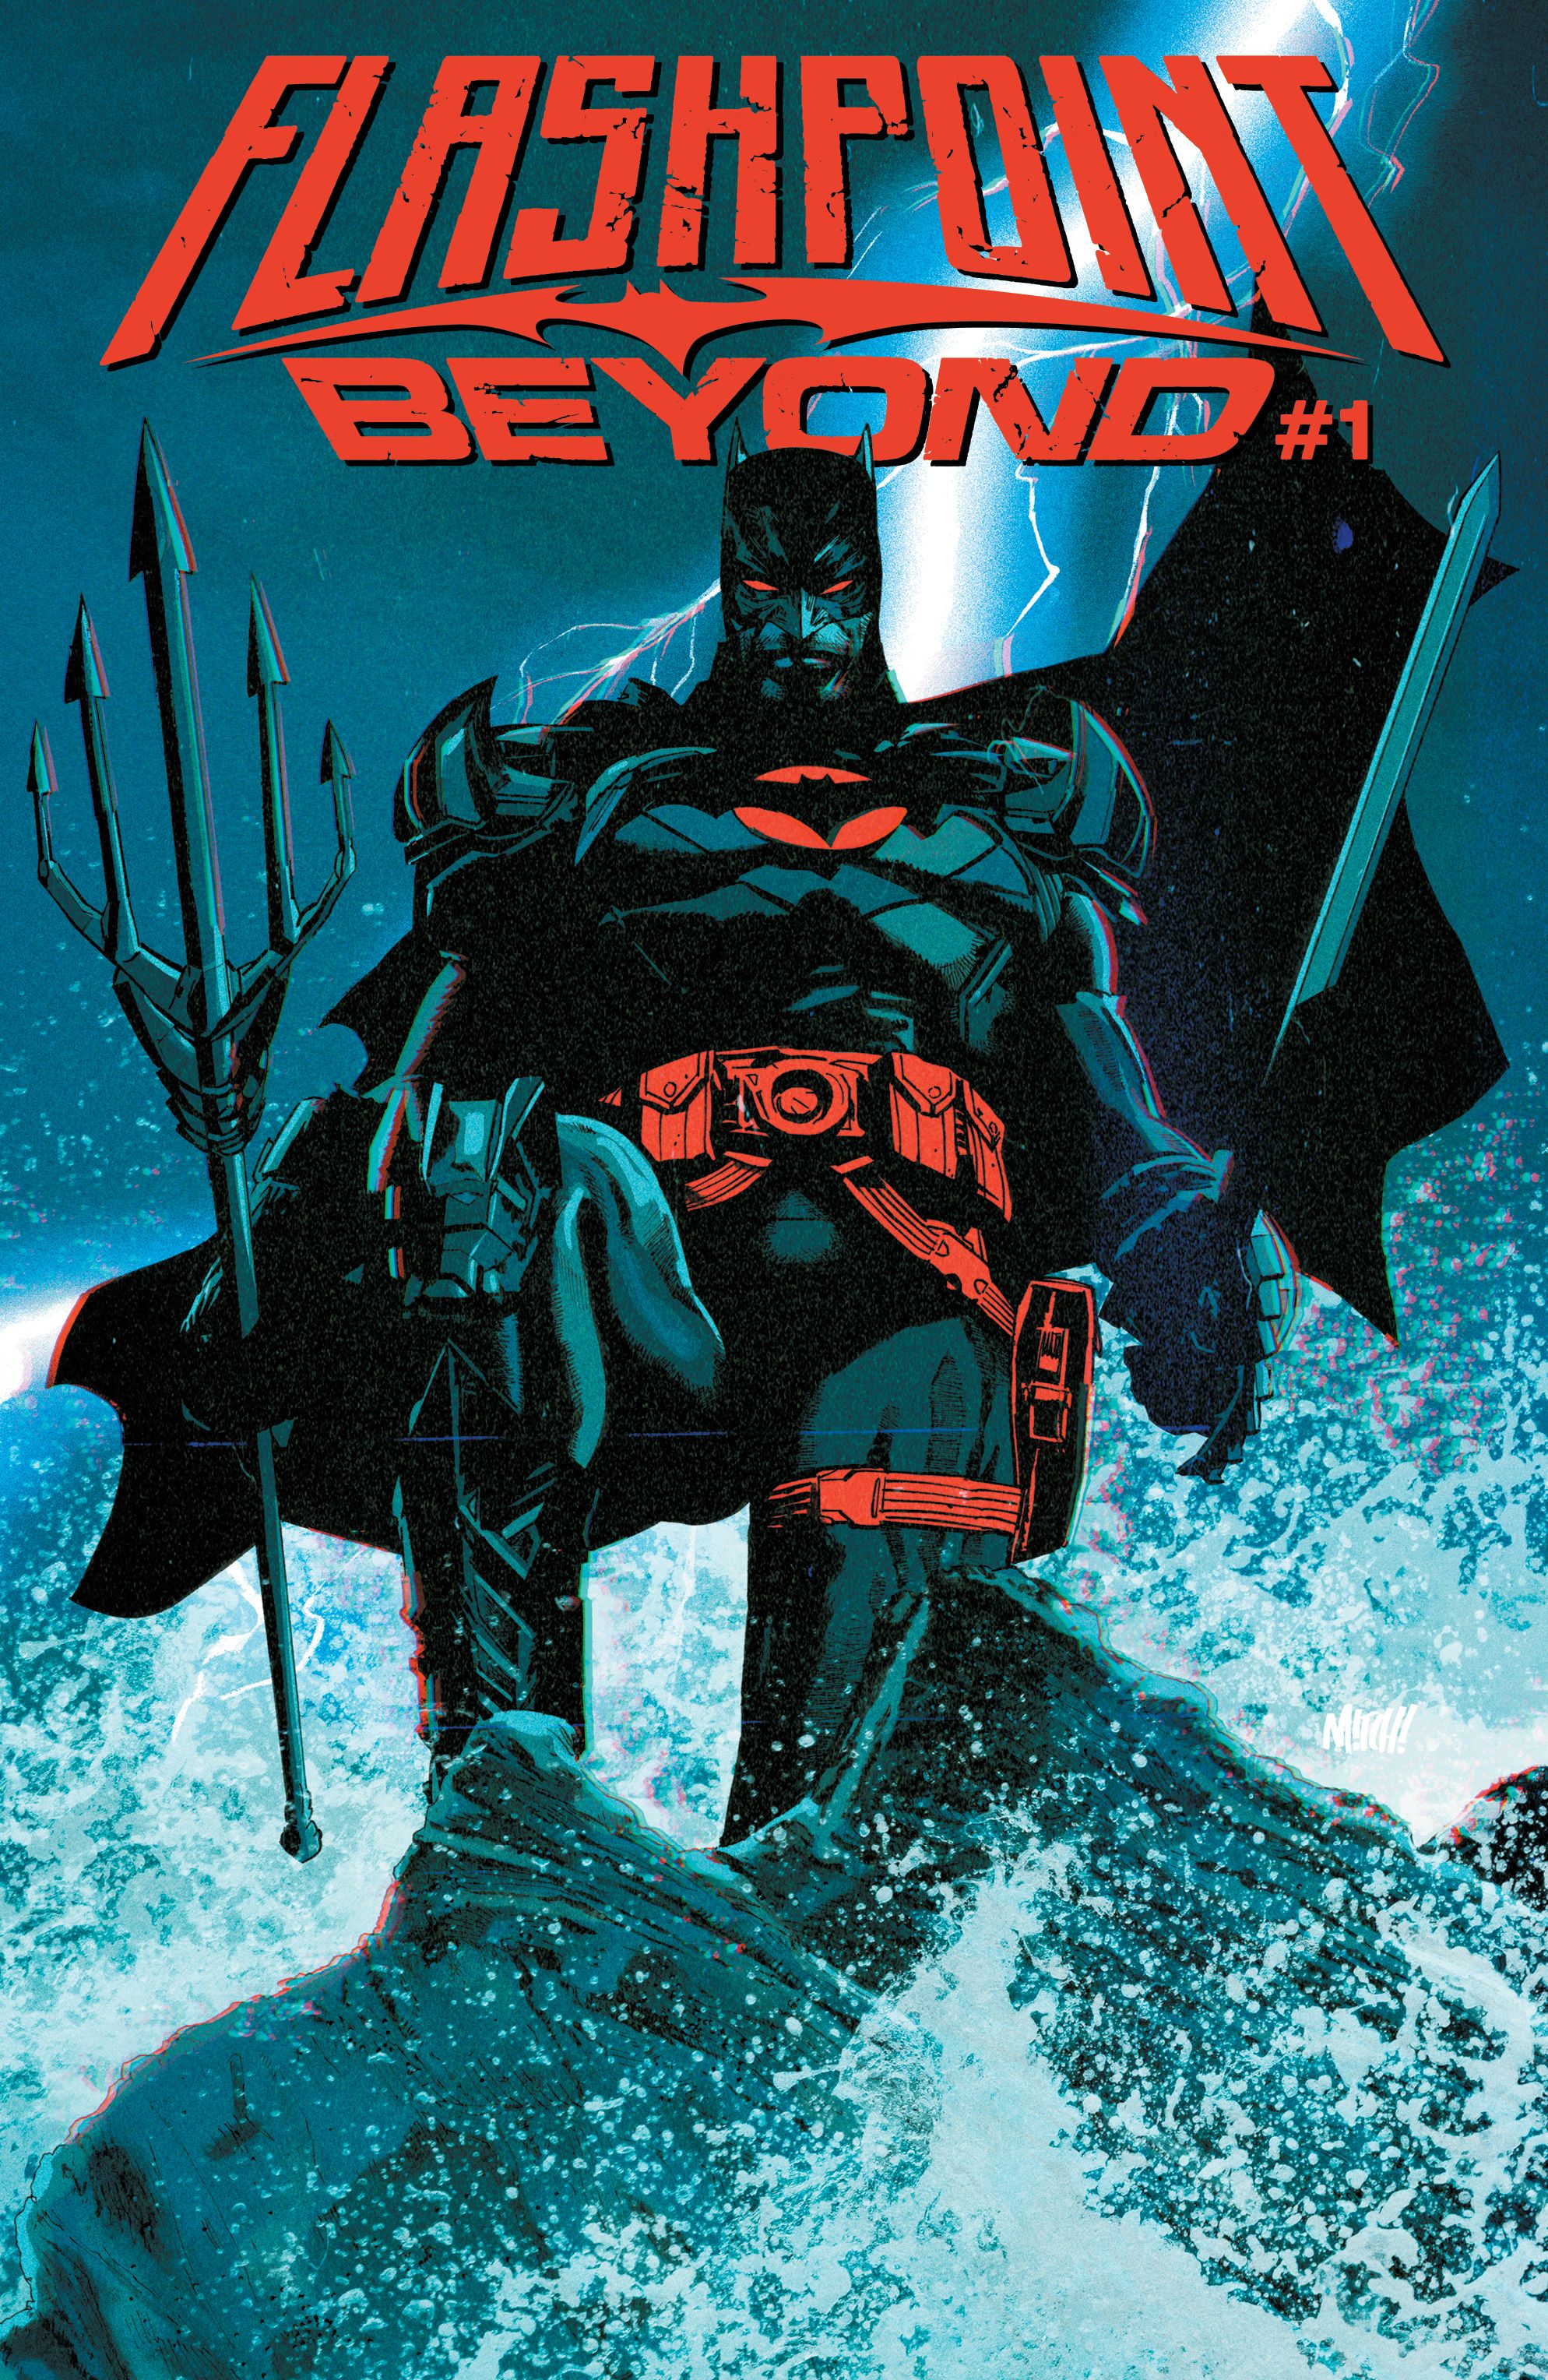 Flashpoint Beyond preview sees Thomas Wayne's Batman and Aquaman go to war.